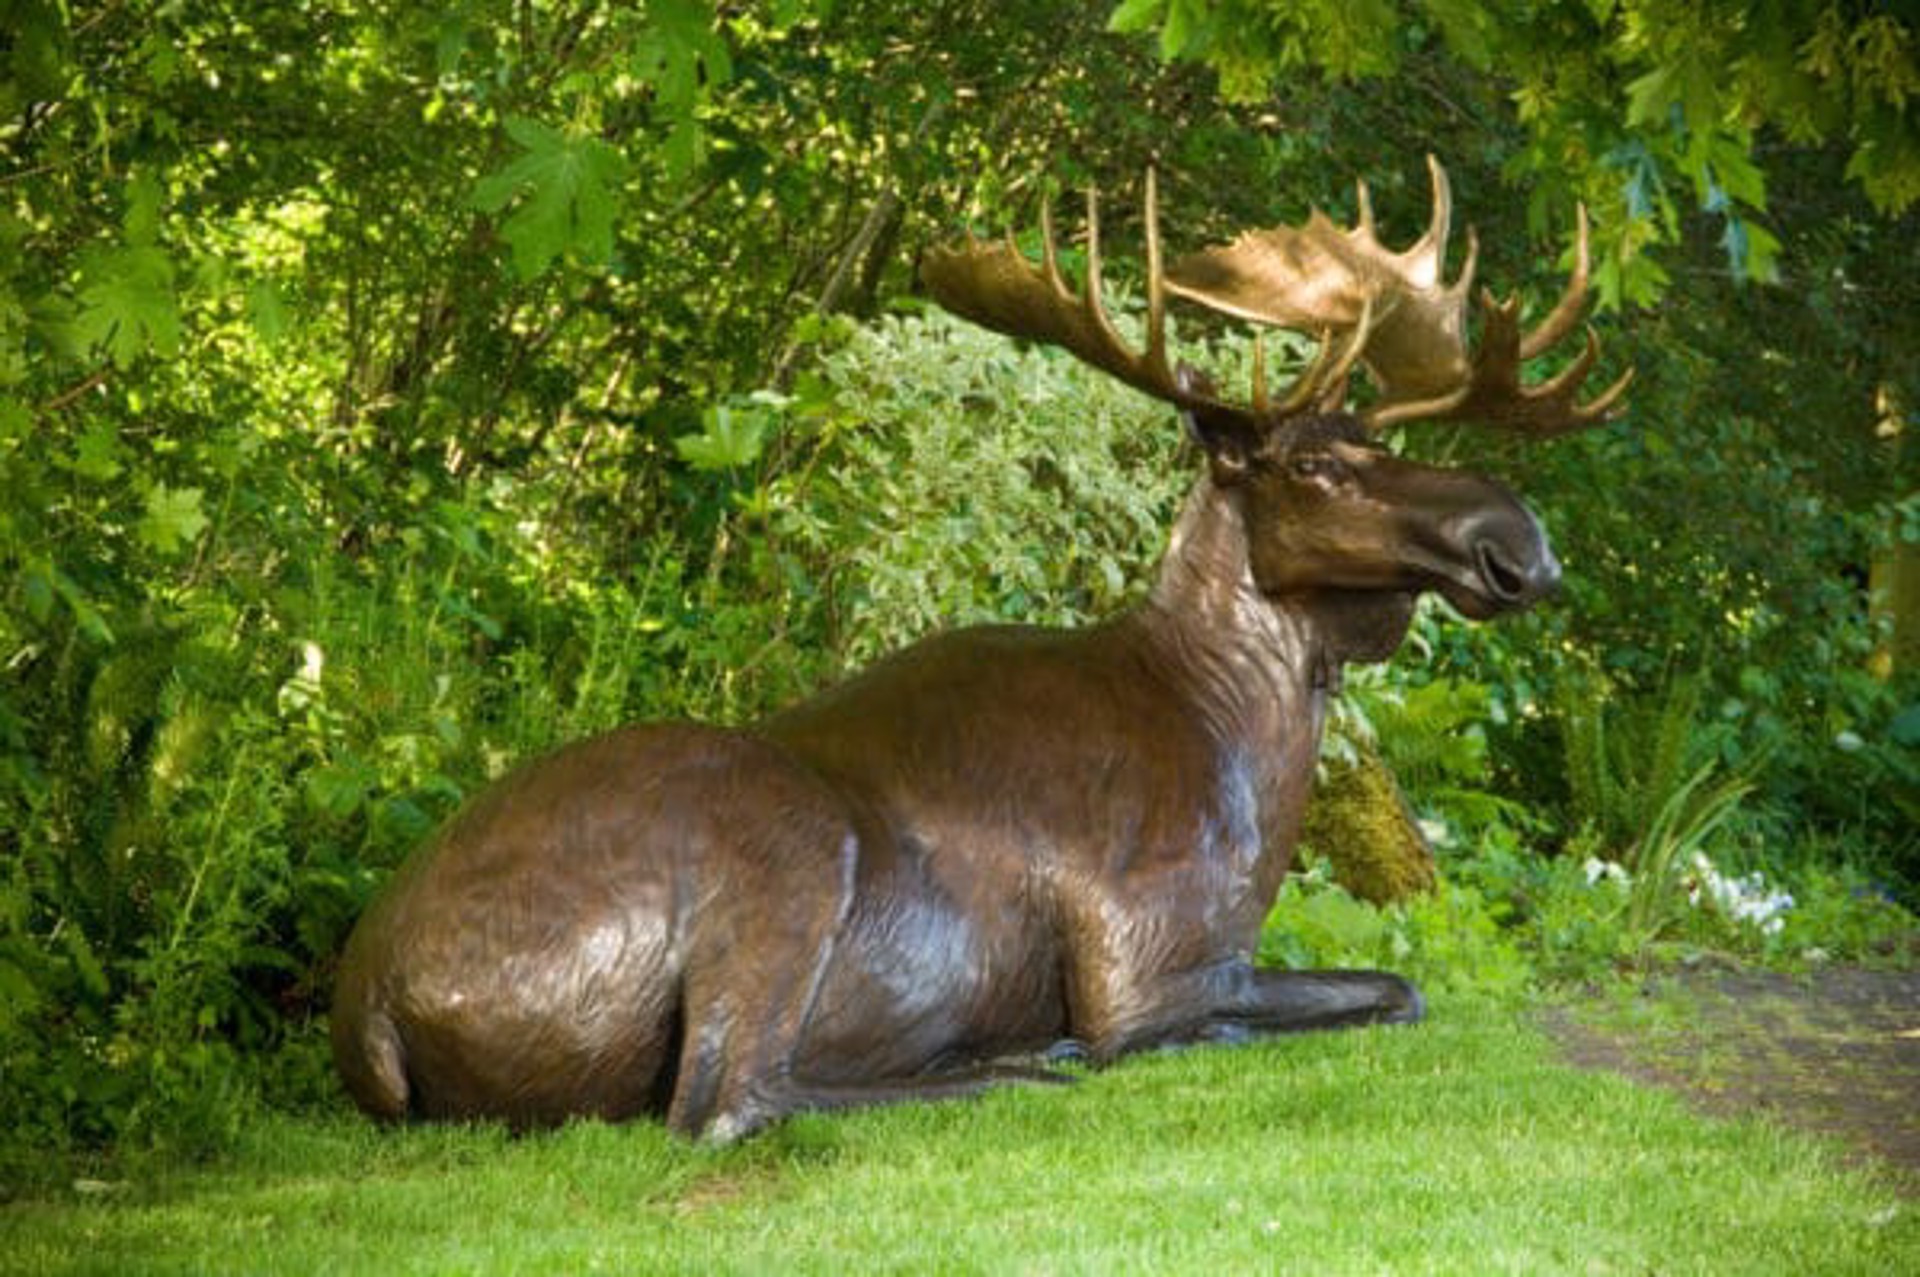 Life Size Bronze Limited Edition Bronze Bull Moose Laying Down, By Rip And Alison Caswell